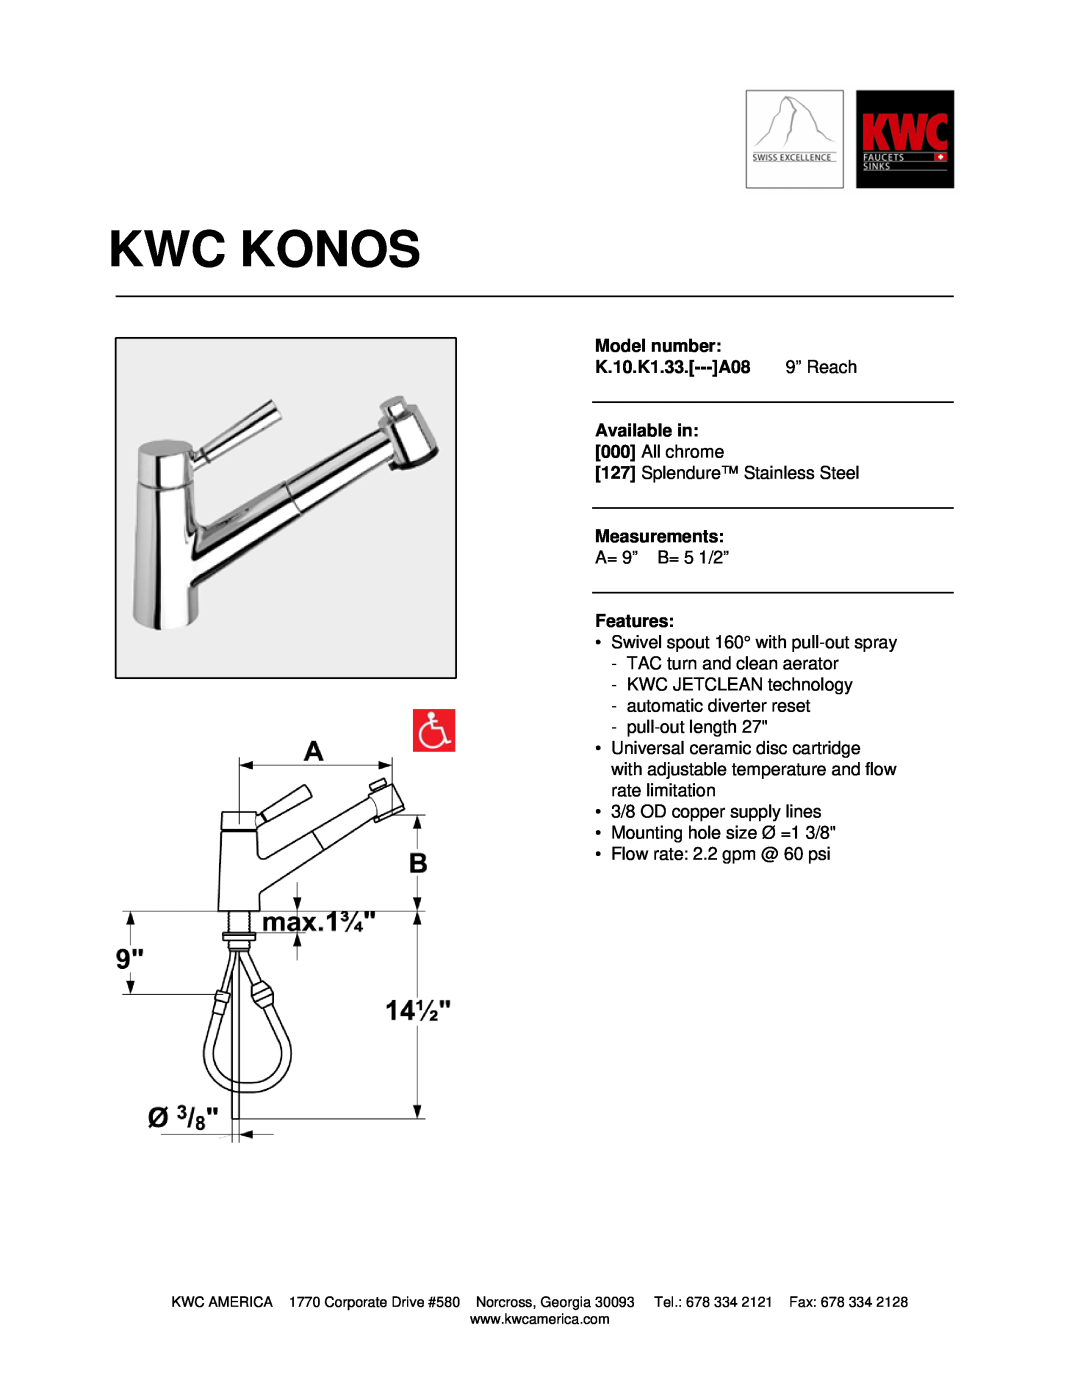 KWC manual Kwc Konos, Model number, K.10.K1.33.---A08, 9” Reach, Available in, Measurements, Features 